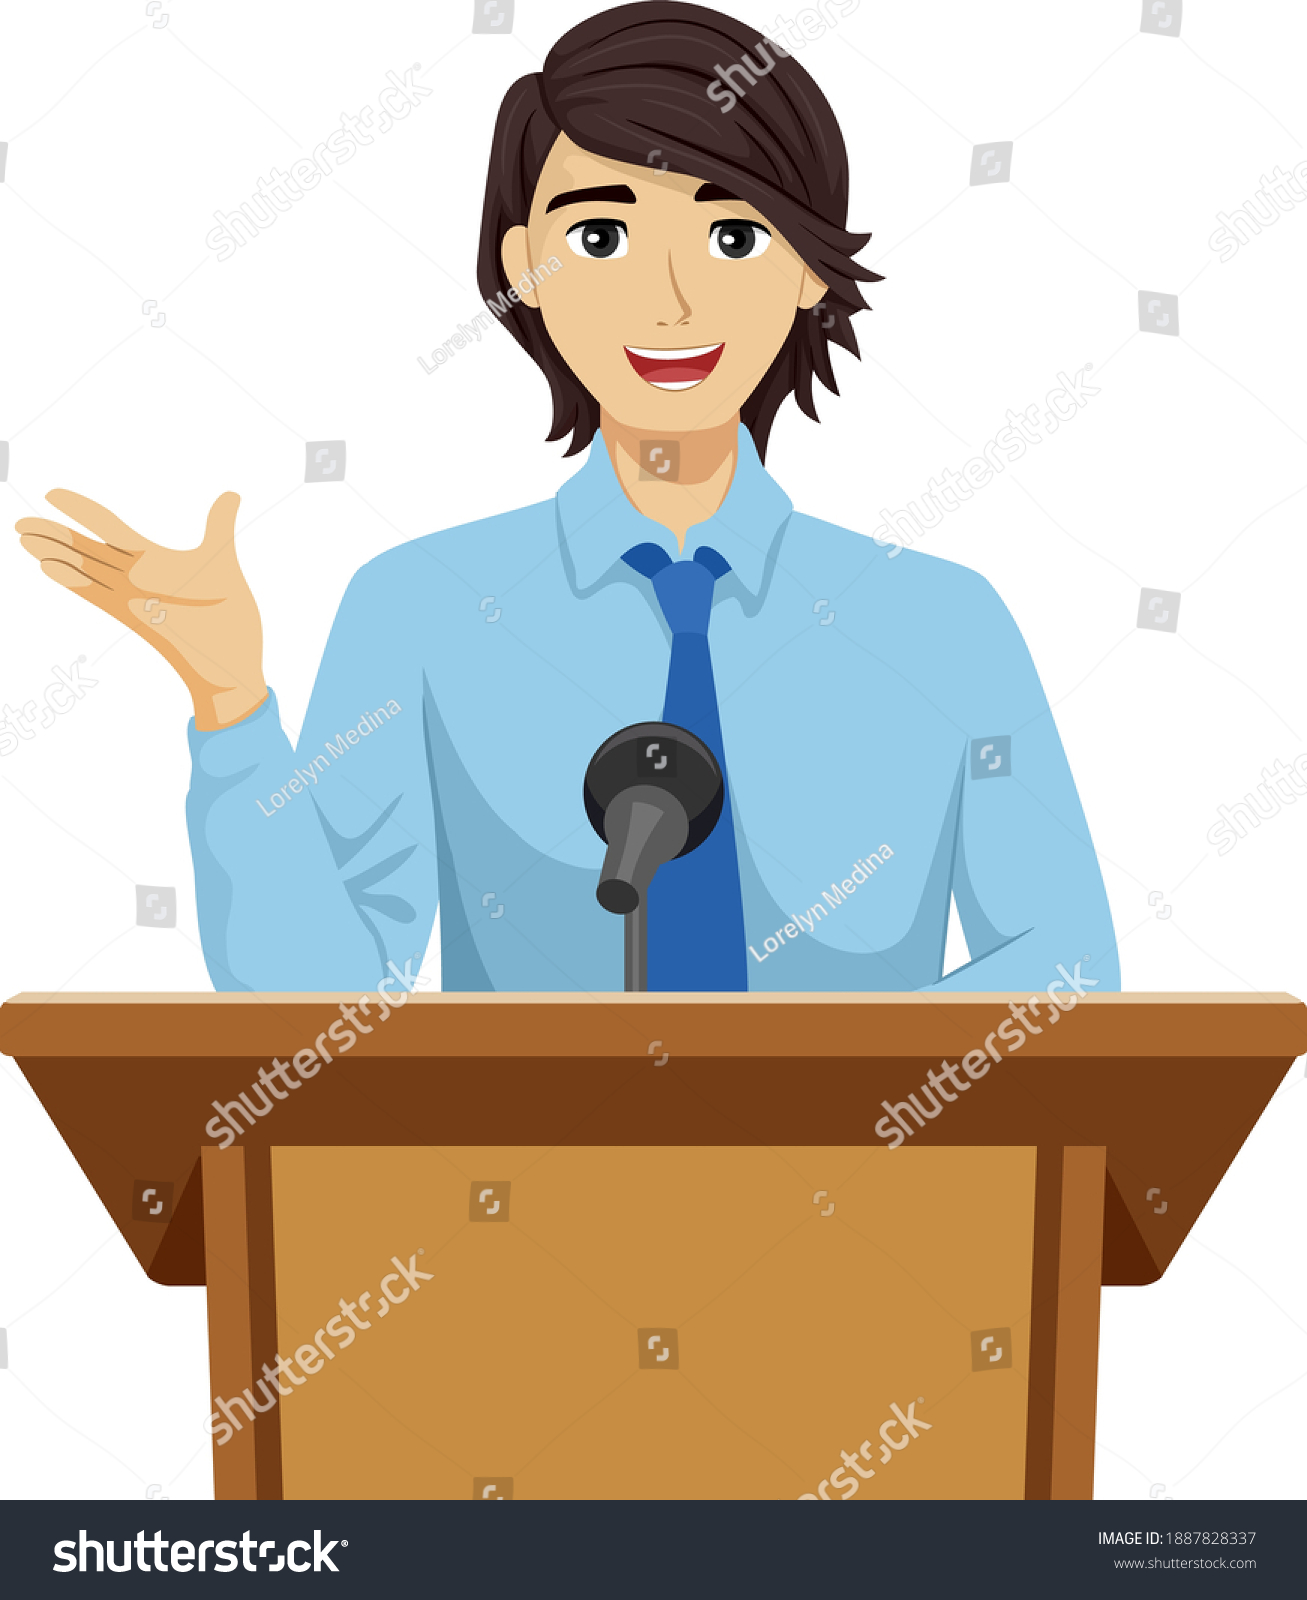 someone giving a speech drawing